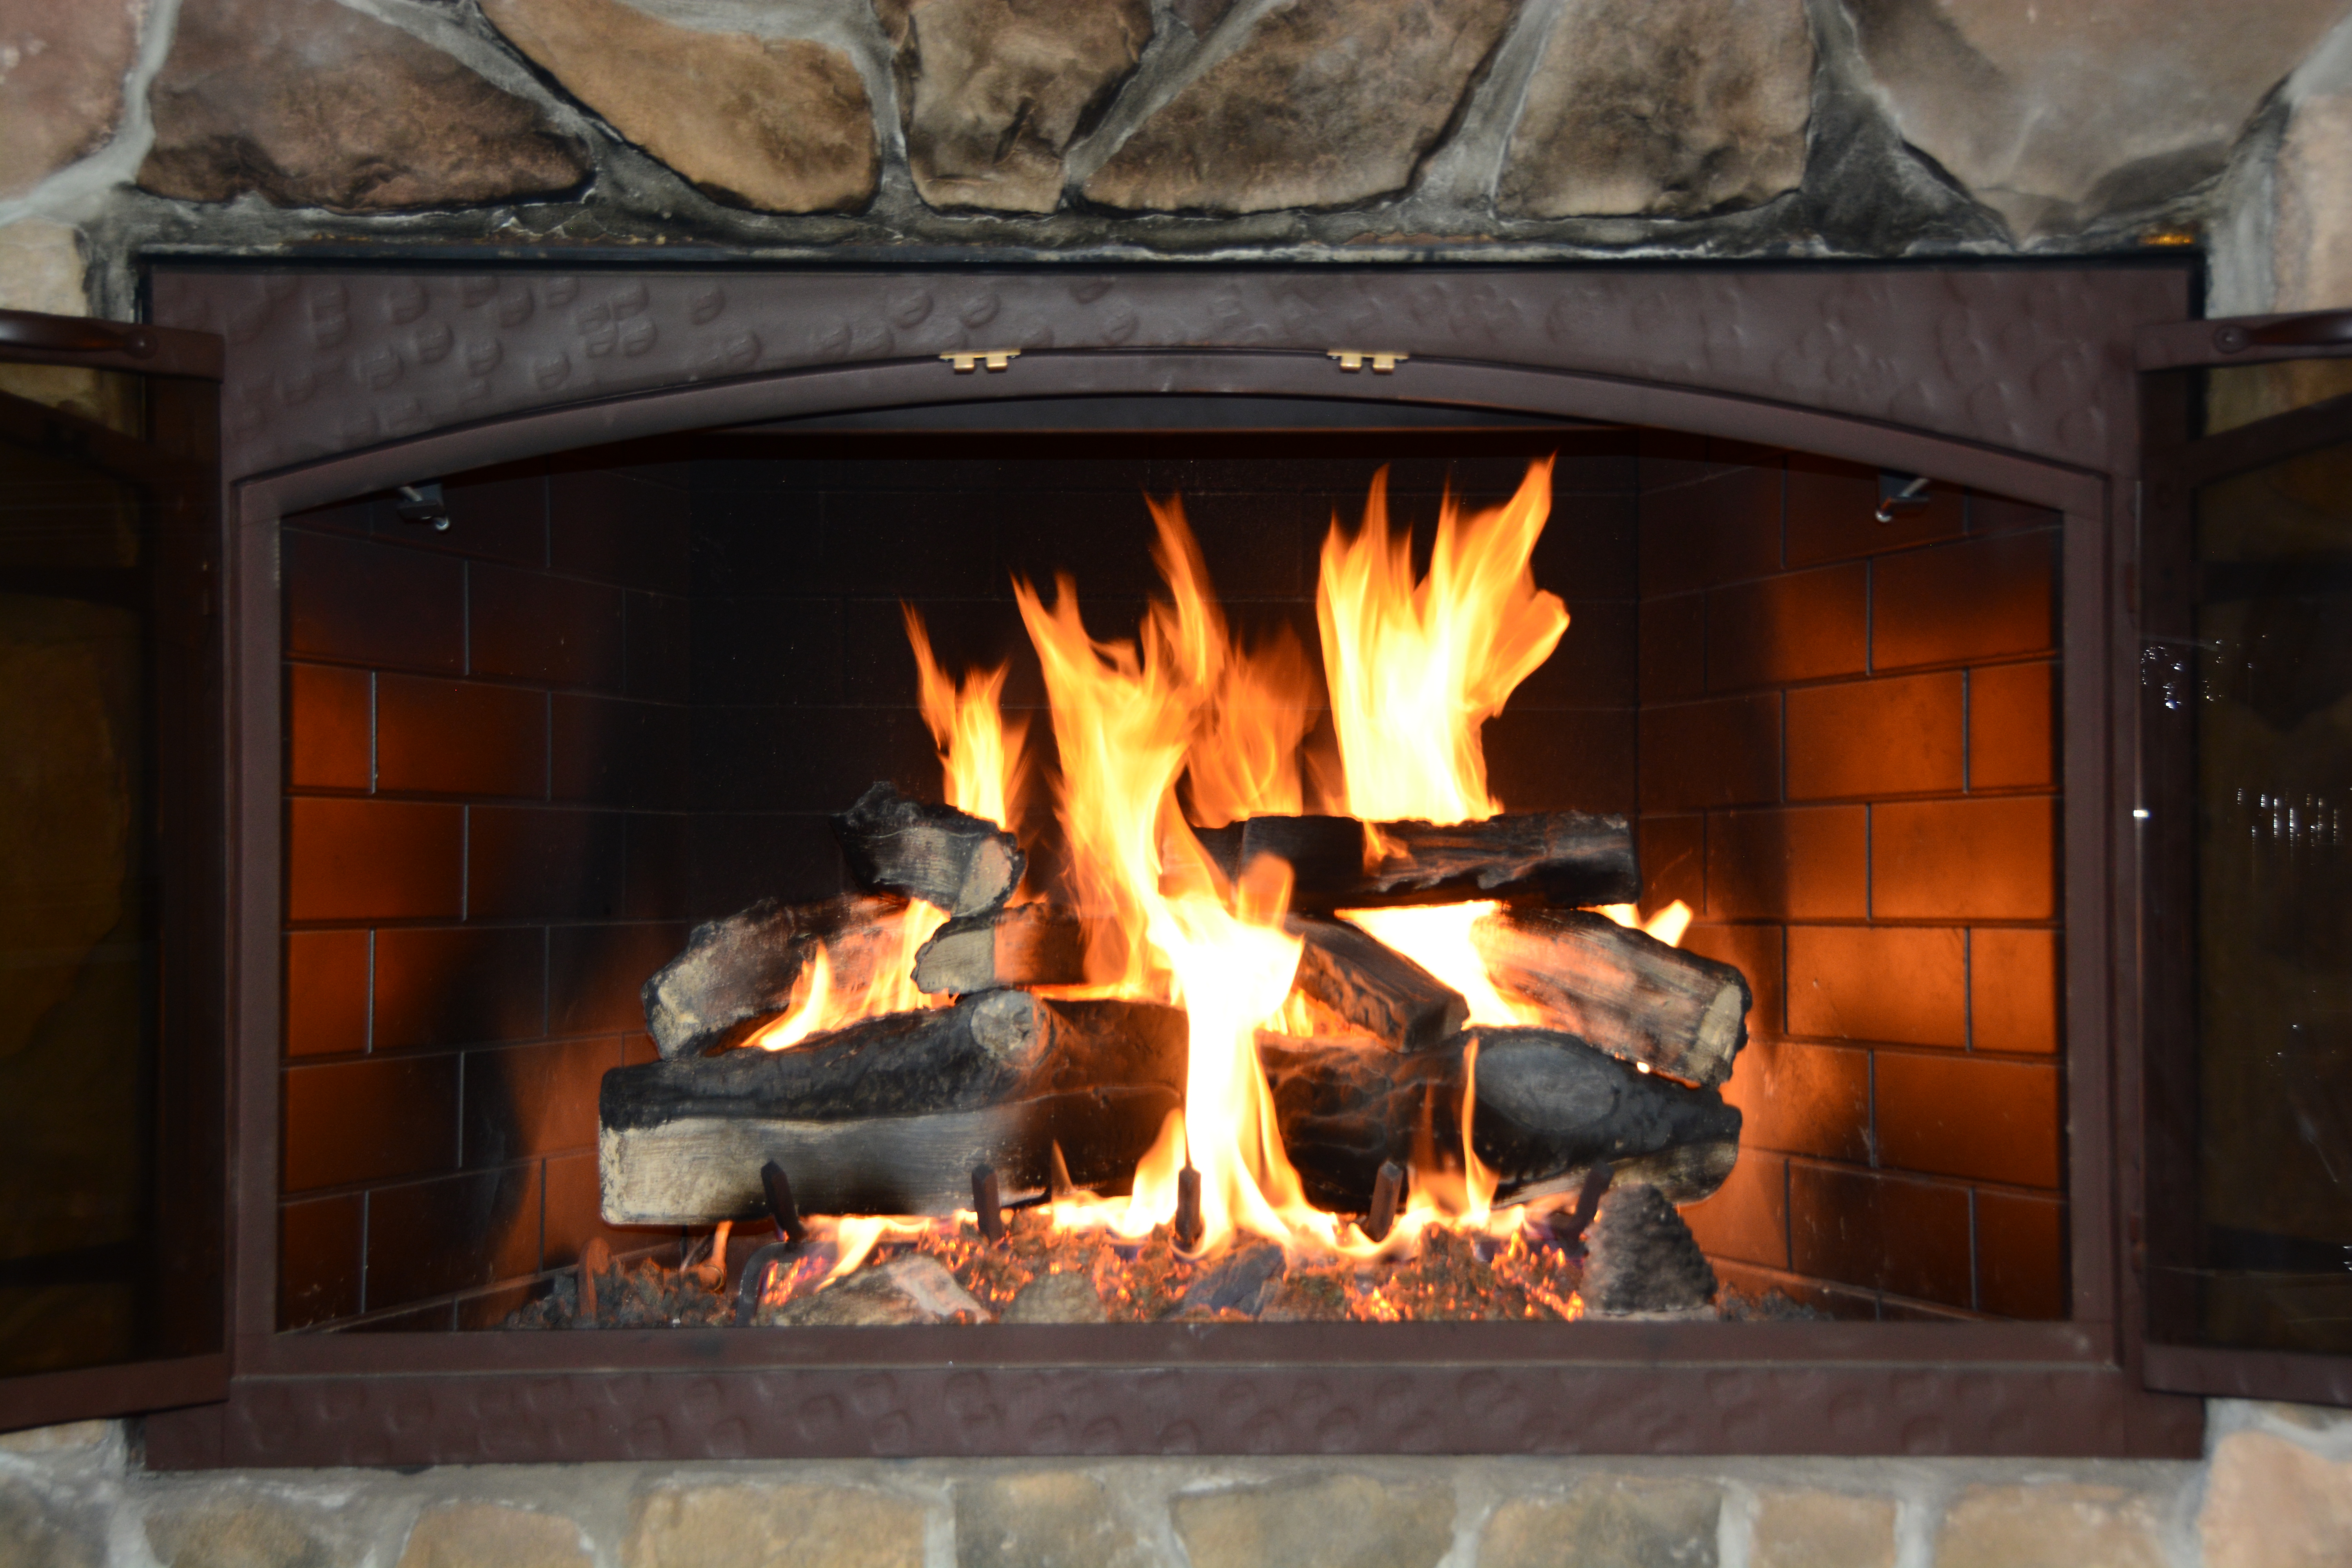 Fireplace Picture, Fireplace Gas Logs, #7390